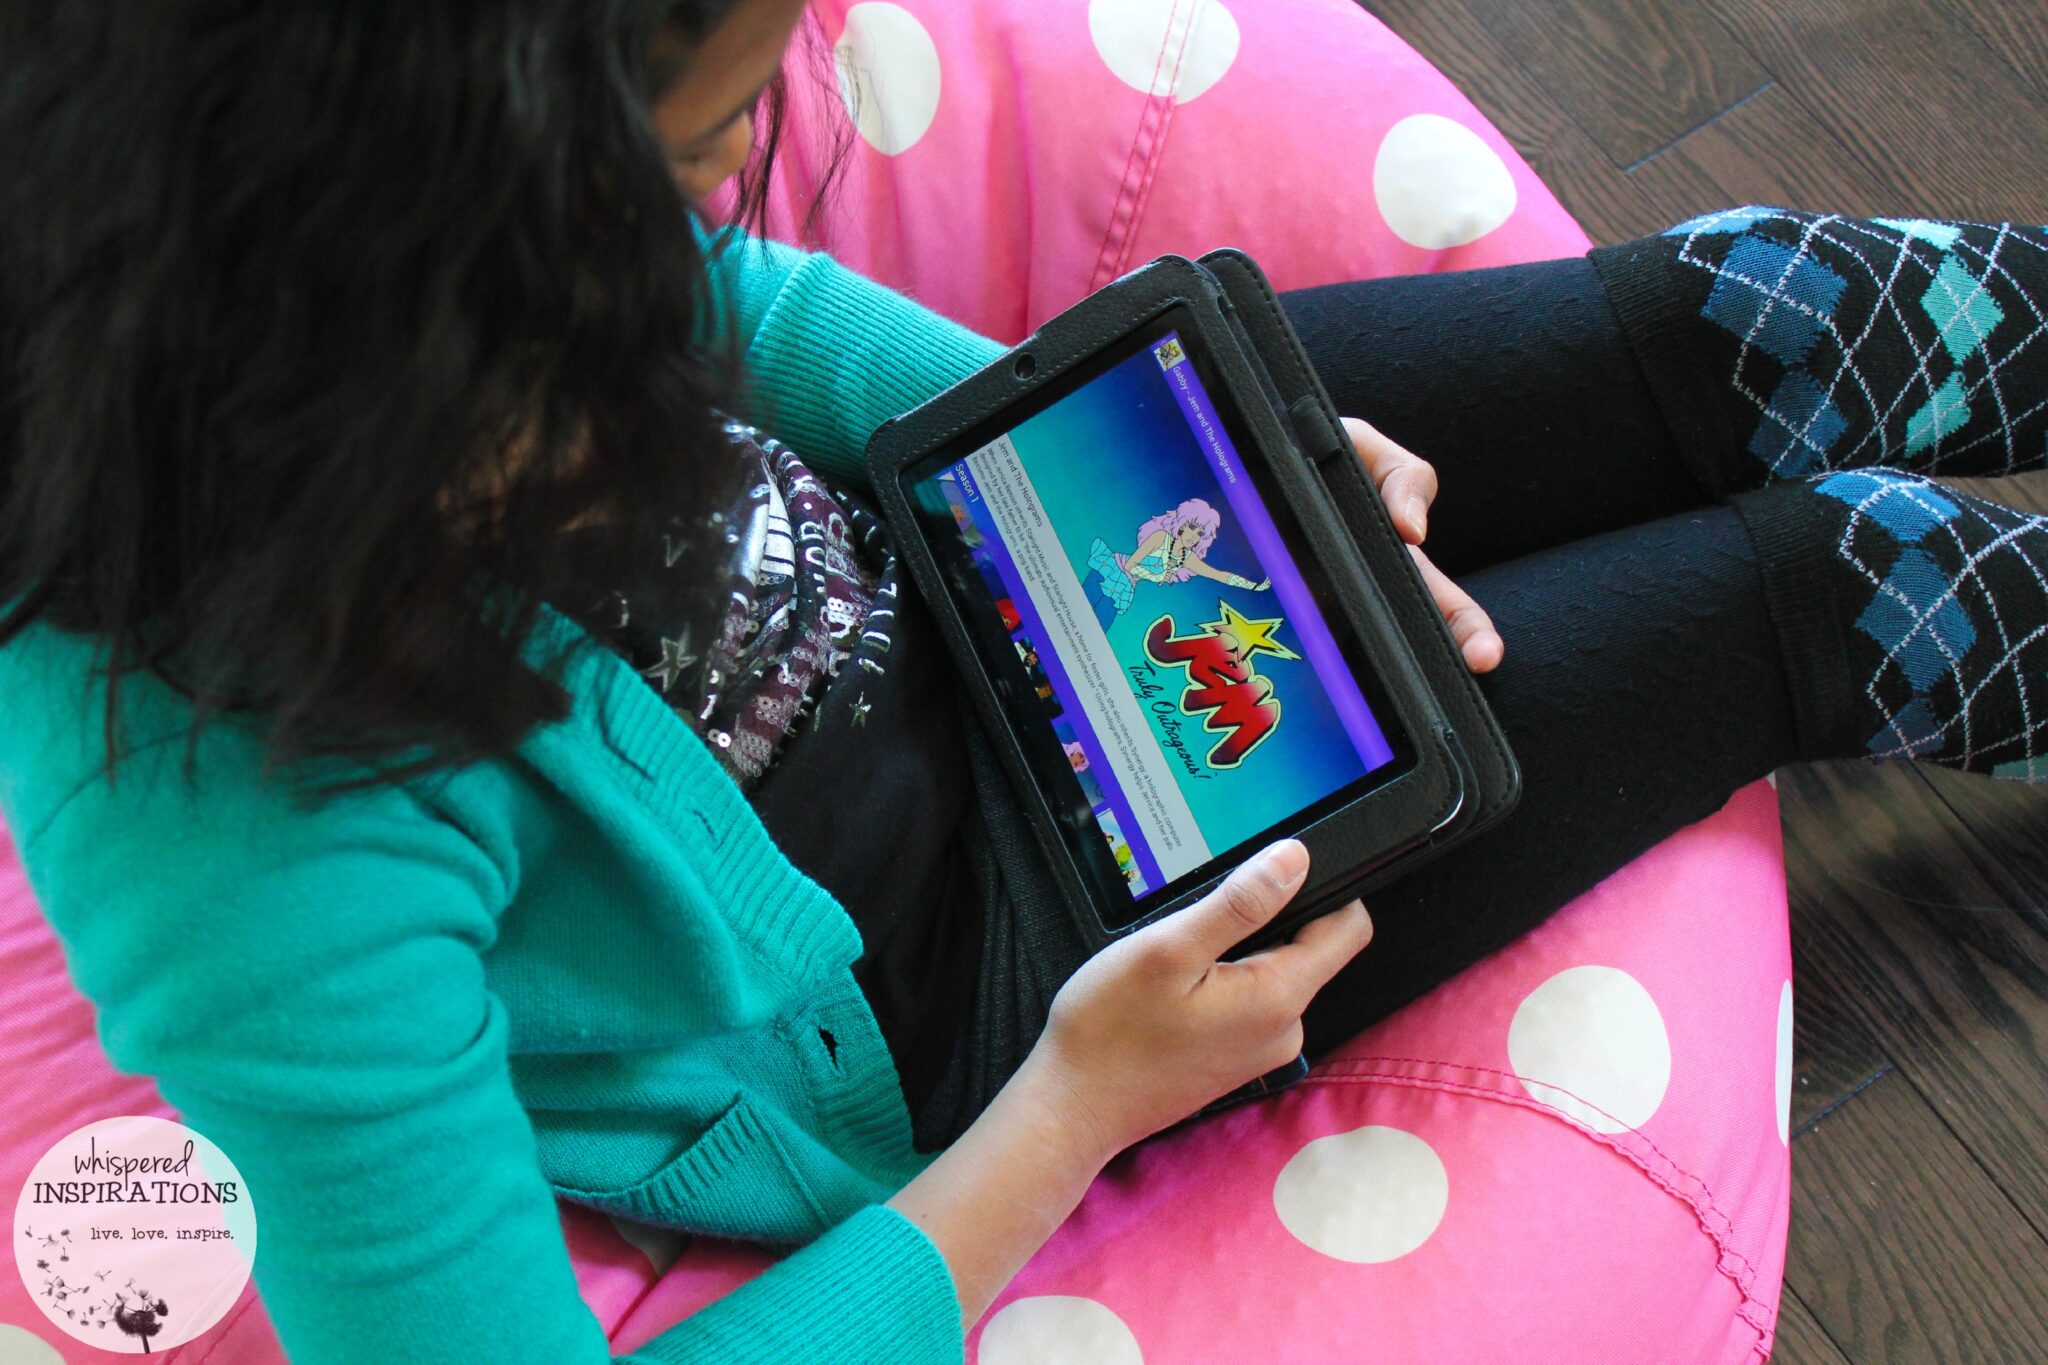 Kidoodle.TV: Television Made for Kids, Loved By Parents. Here’s Why! Enter to WIN a 1-Year Subscription! #KidoodleMom